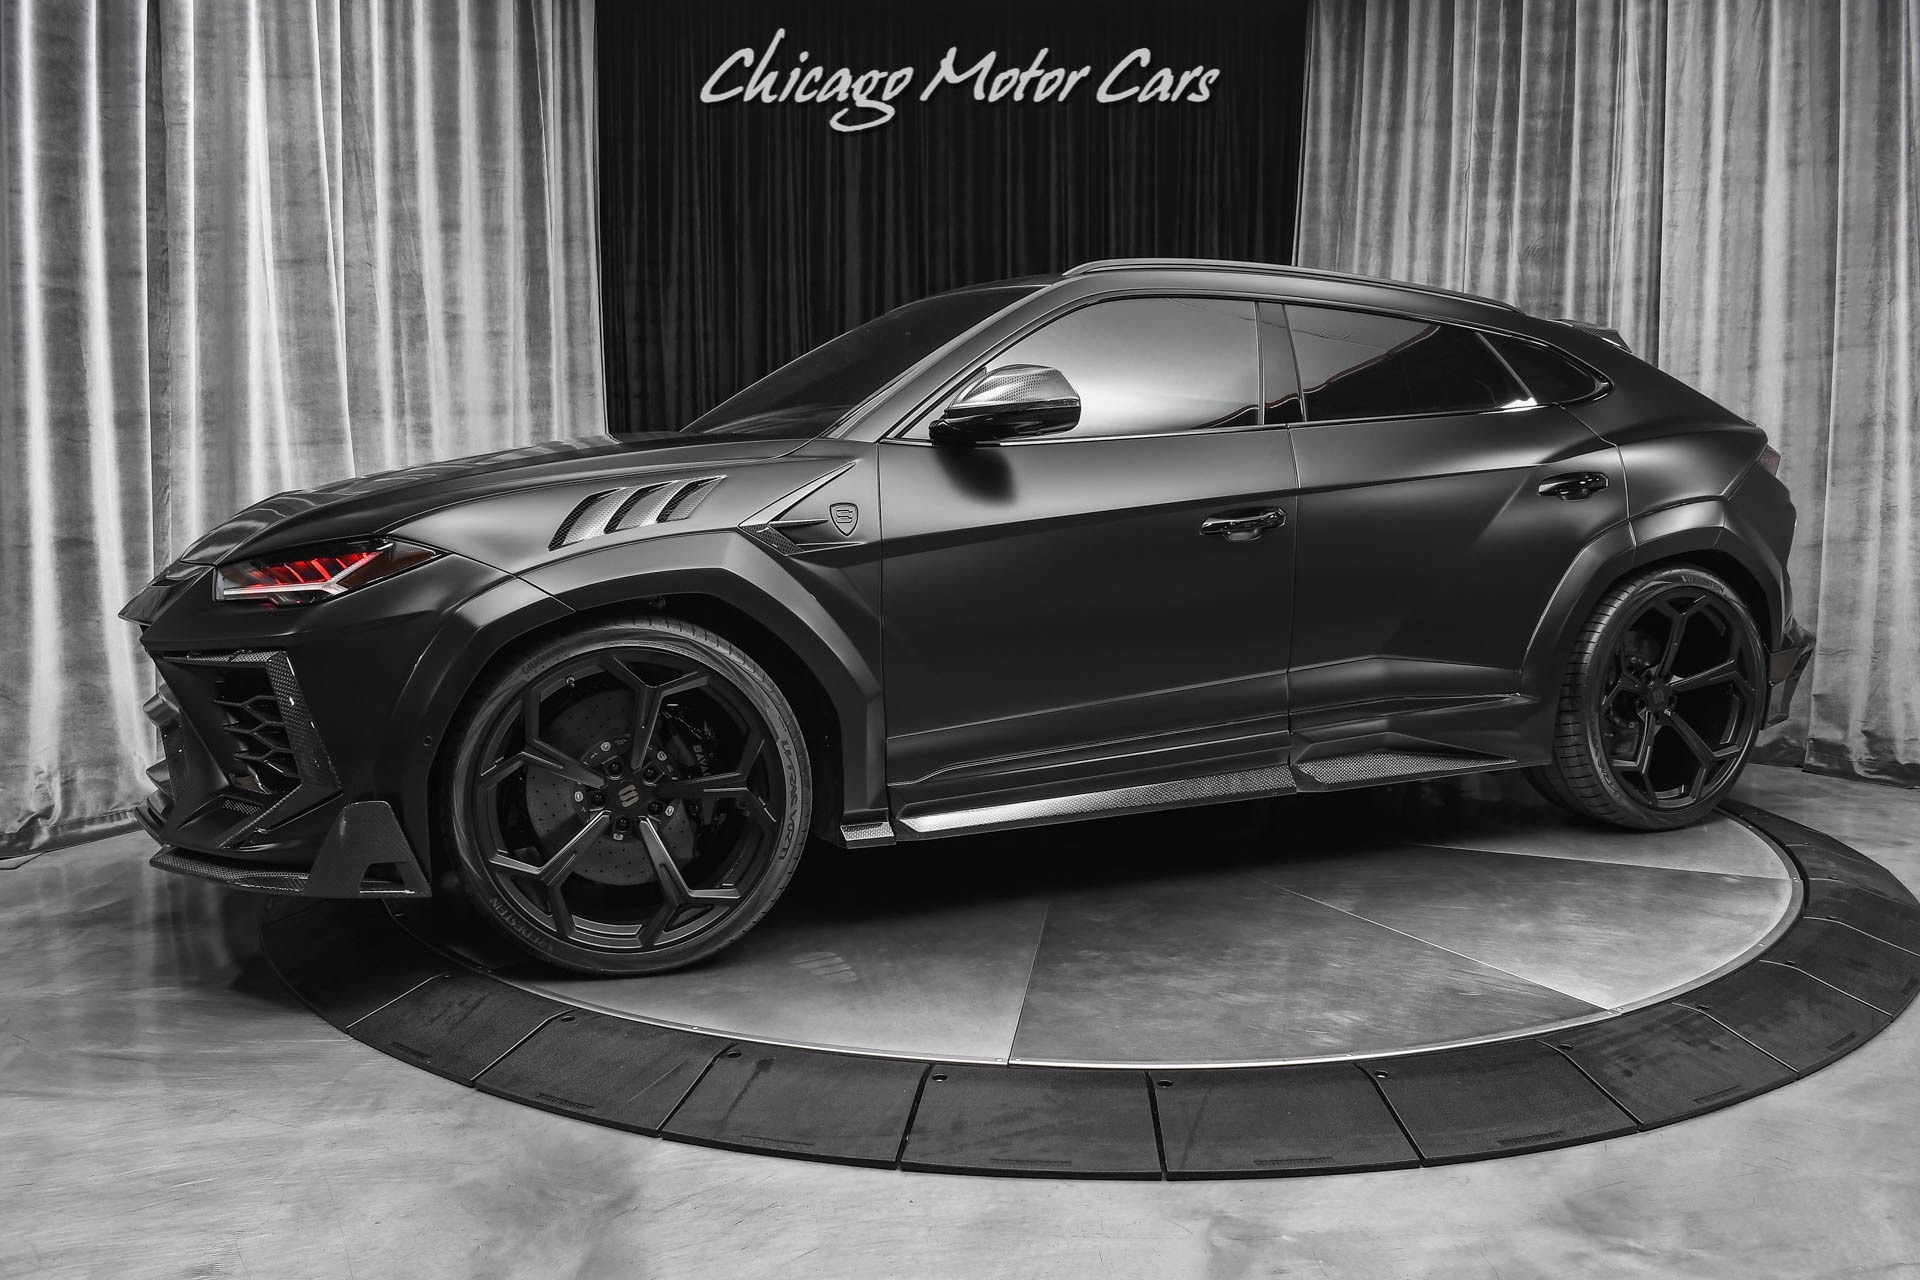 Used 2020 Lamborghini Urus SUV MANSORY Wide Body Carbonado Stealth SAVAGE  Edition! Full Carbon Fiber! For Sale (Special Pricing) | Chicago Motor Cars  Stock #18350